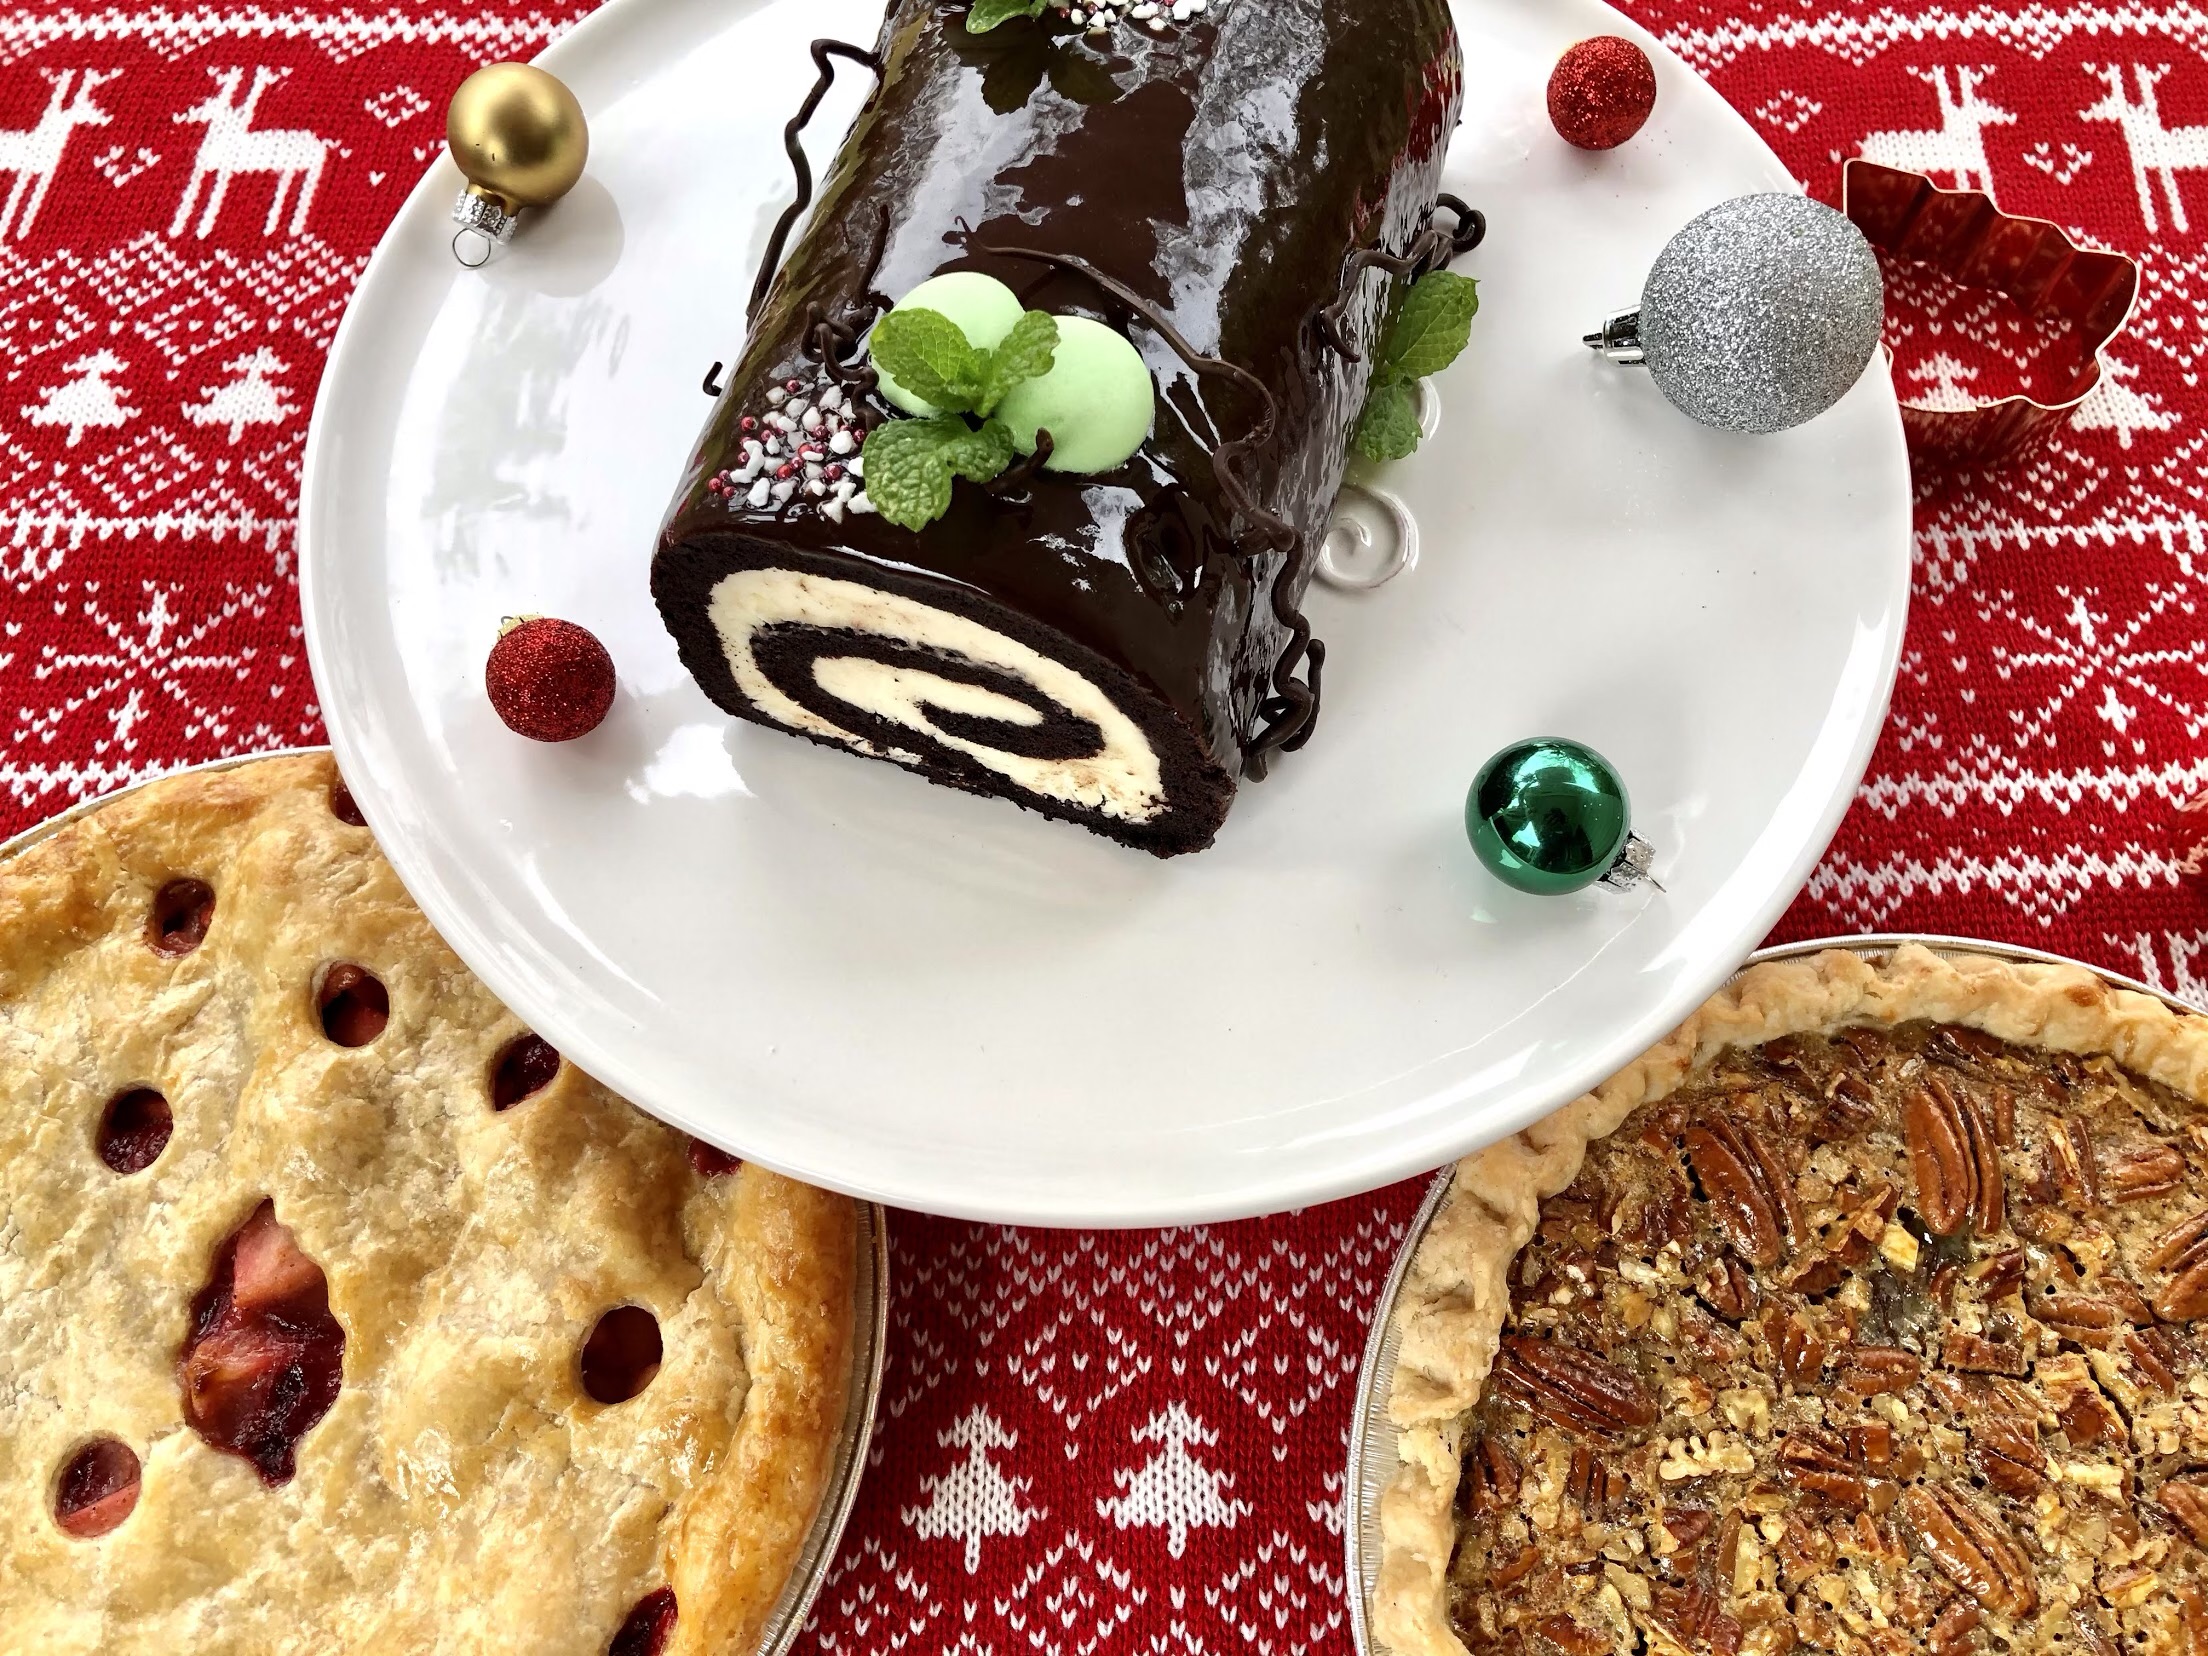 Peppermint chocolate chip yule log from Kirsh Baking Company.